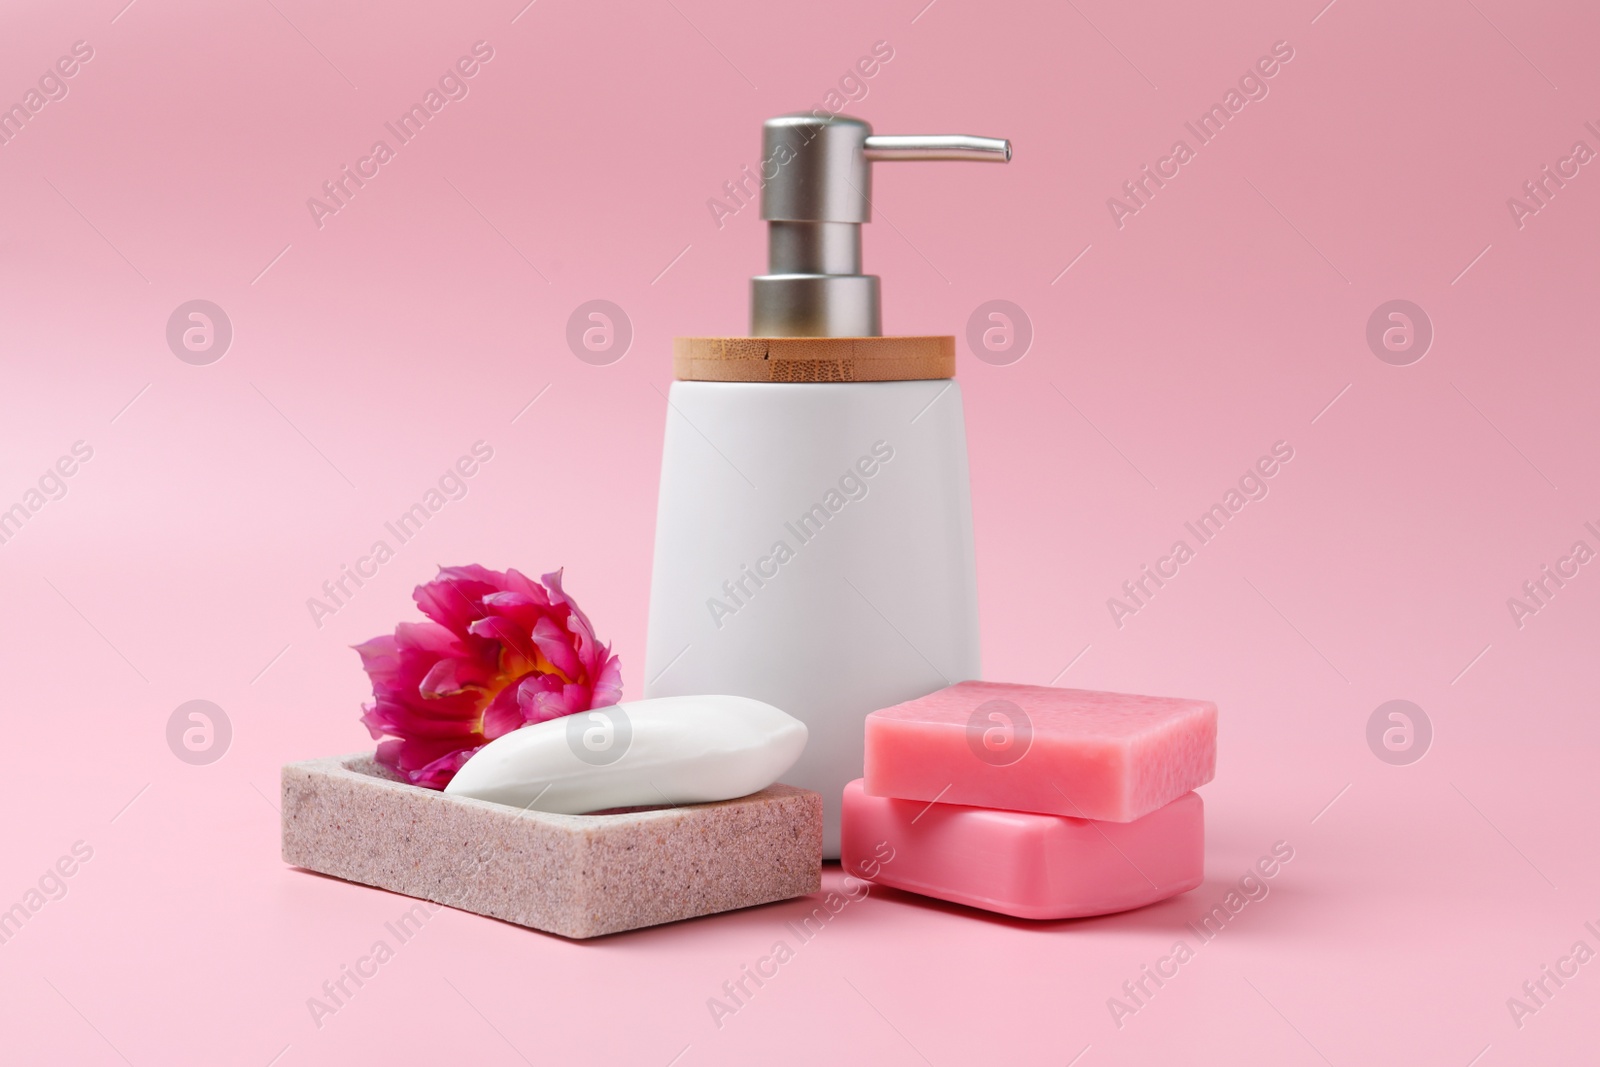 Photo of Soap bar and bottle dispenser on pink background